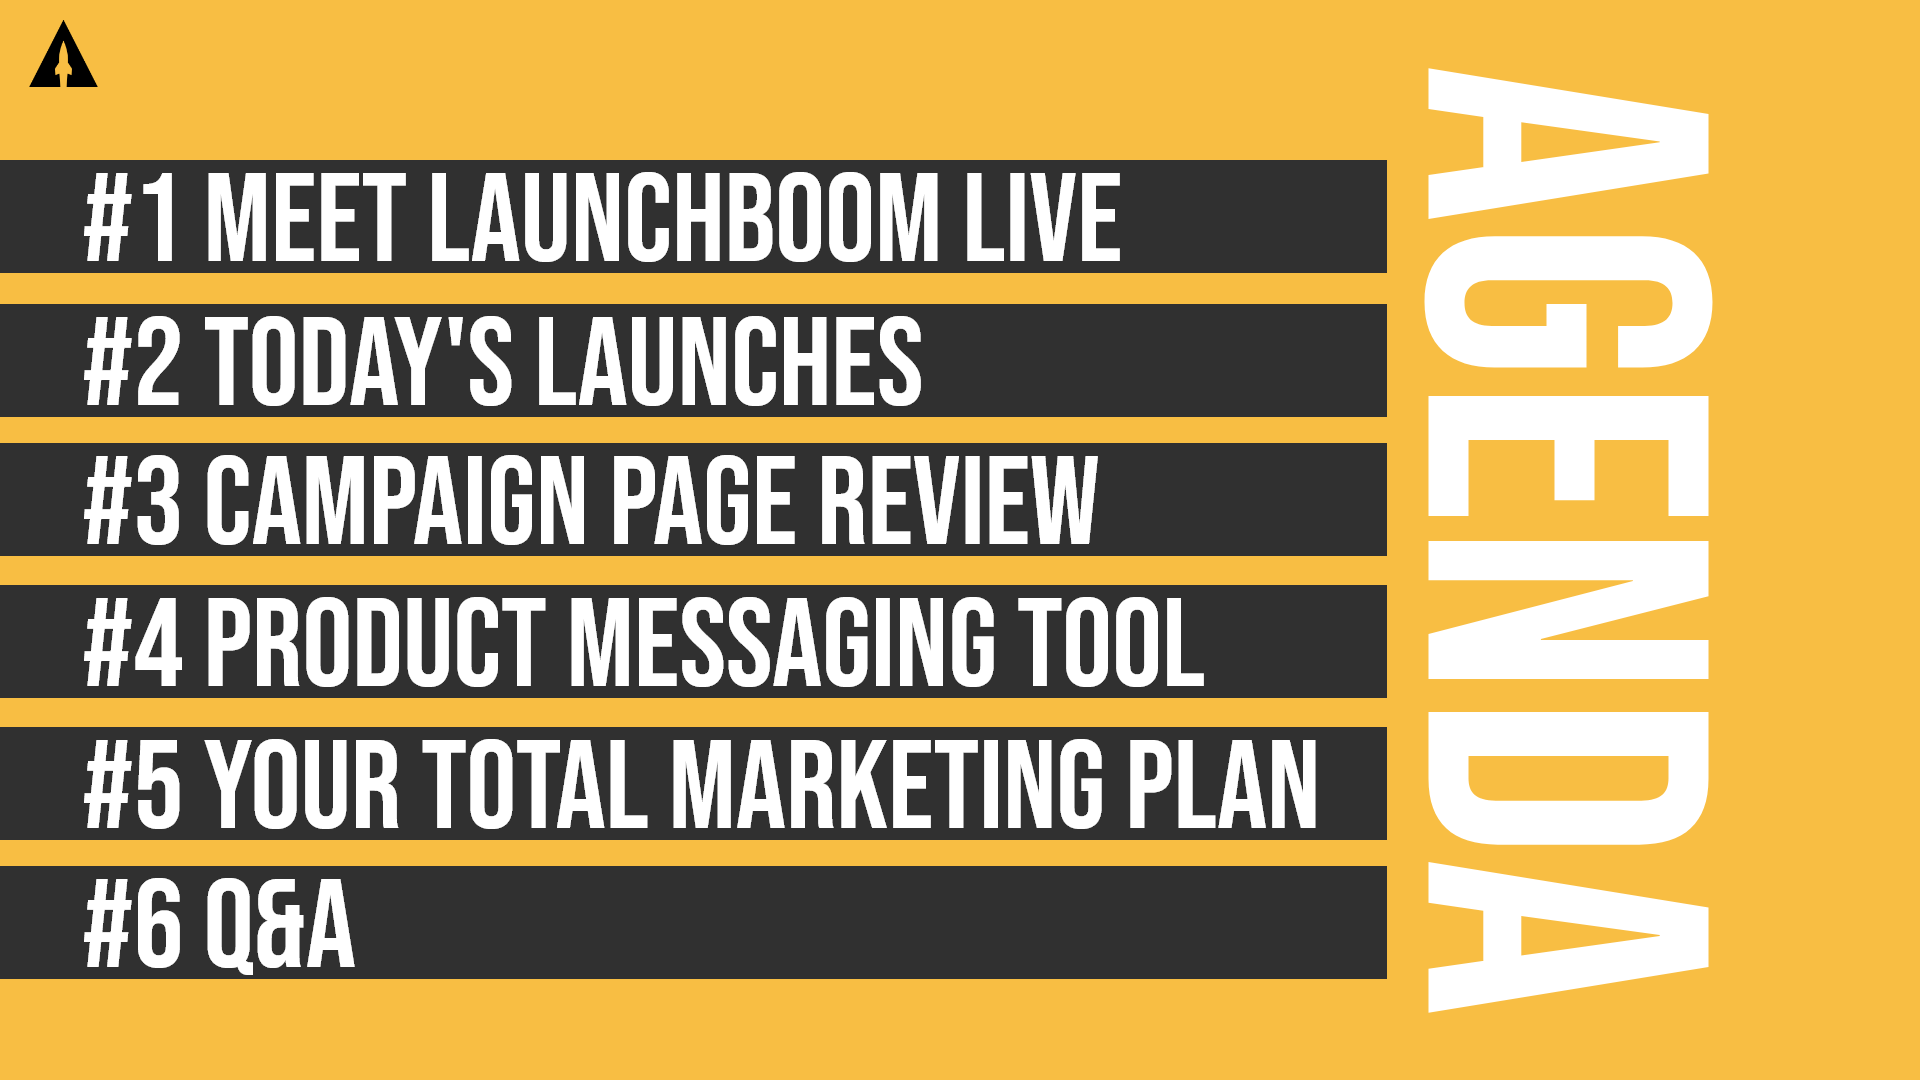 LaunchBoom Live Recap: Campaign page pointers, product messaging, and email lists